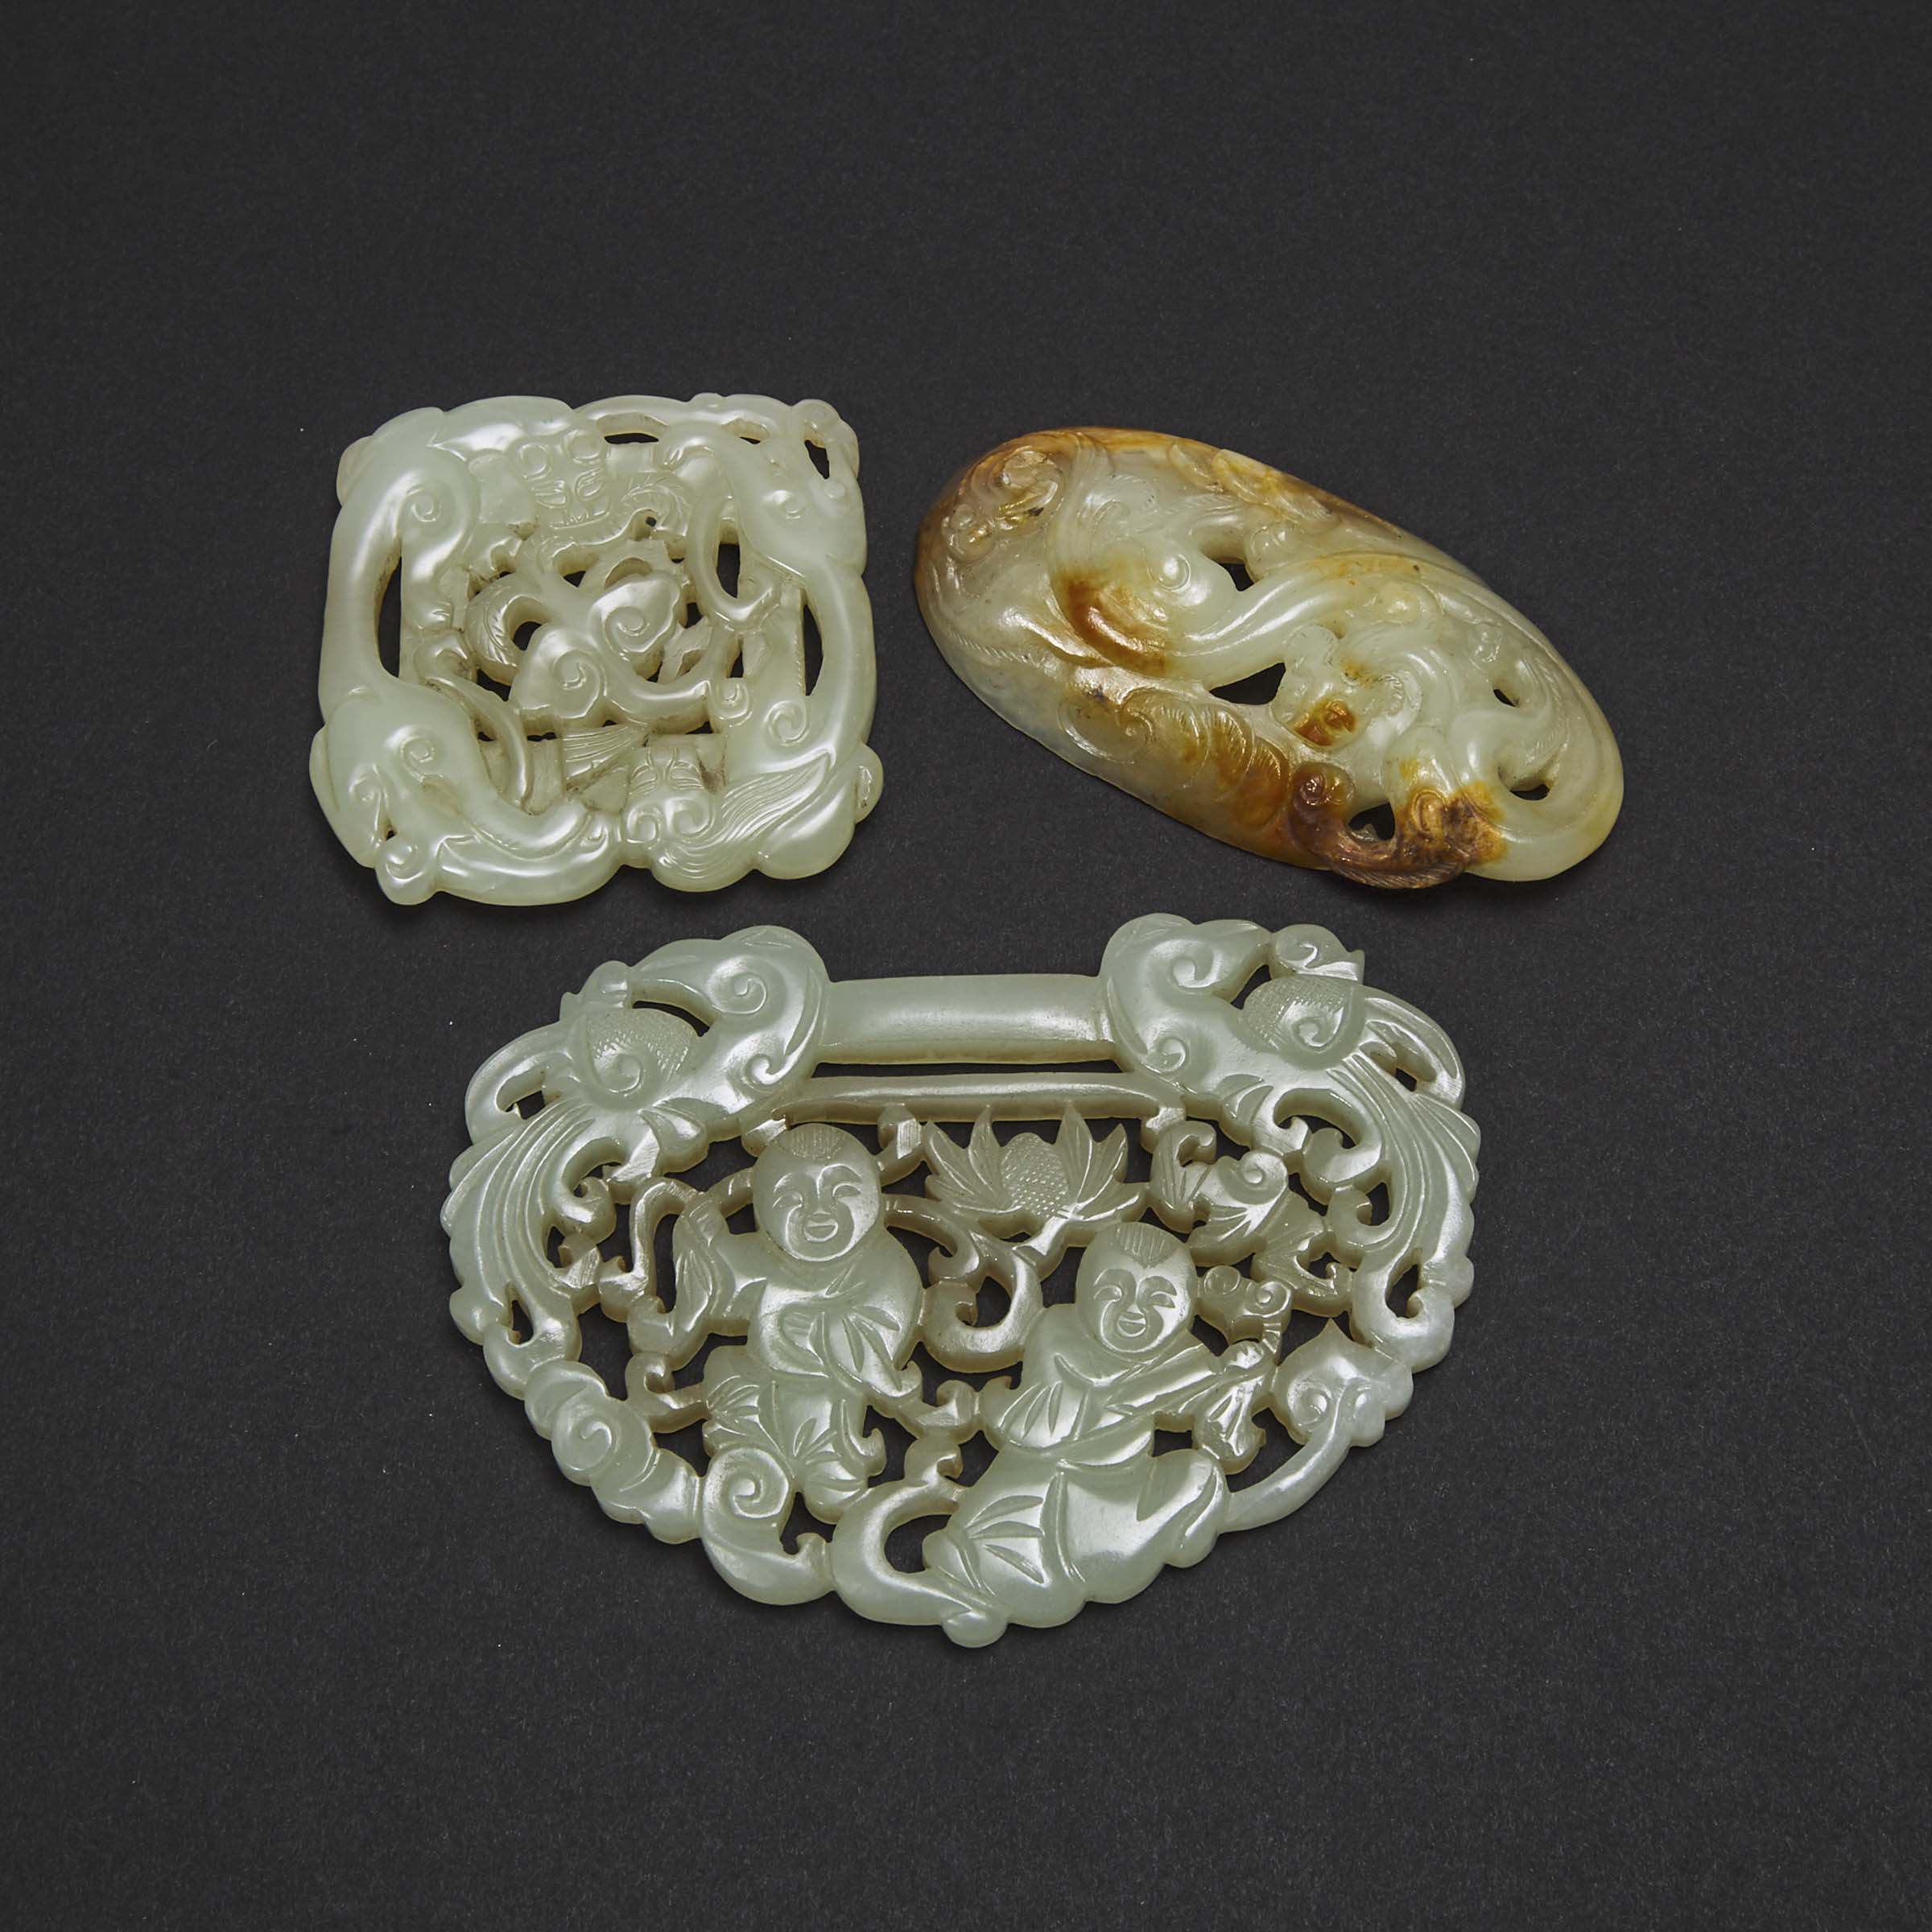 A Group of Three Reticulated Jade Carvings